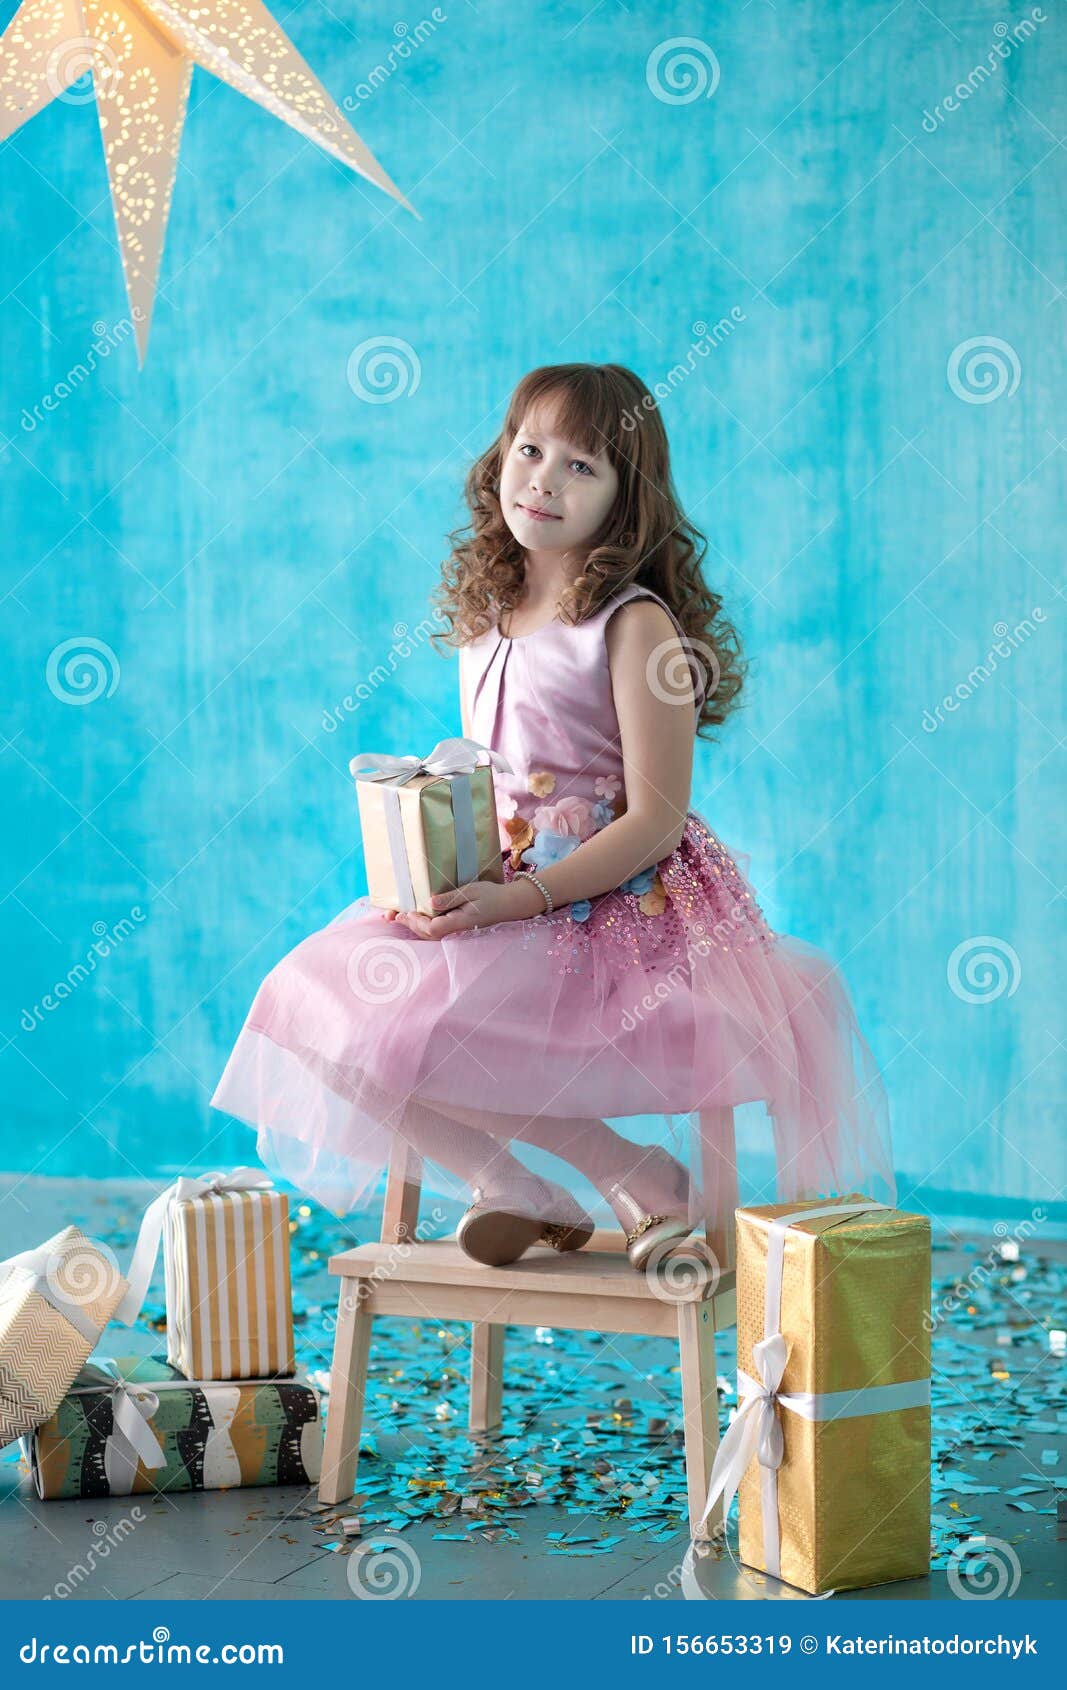 Merry Christmas And Happy New Year 2020! Cute Little Girl Opens A Gift And Smiles. Beautiful ...